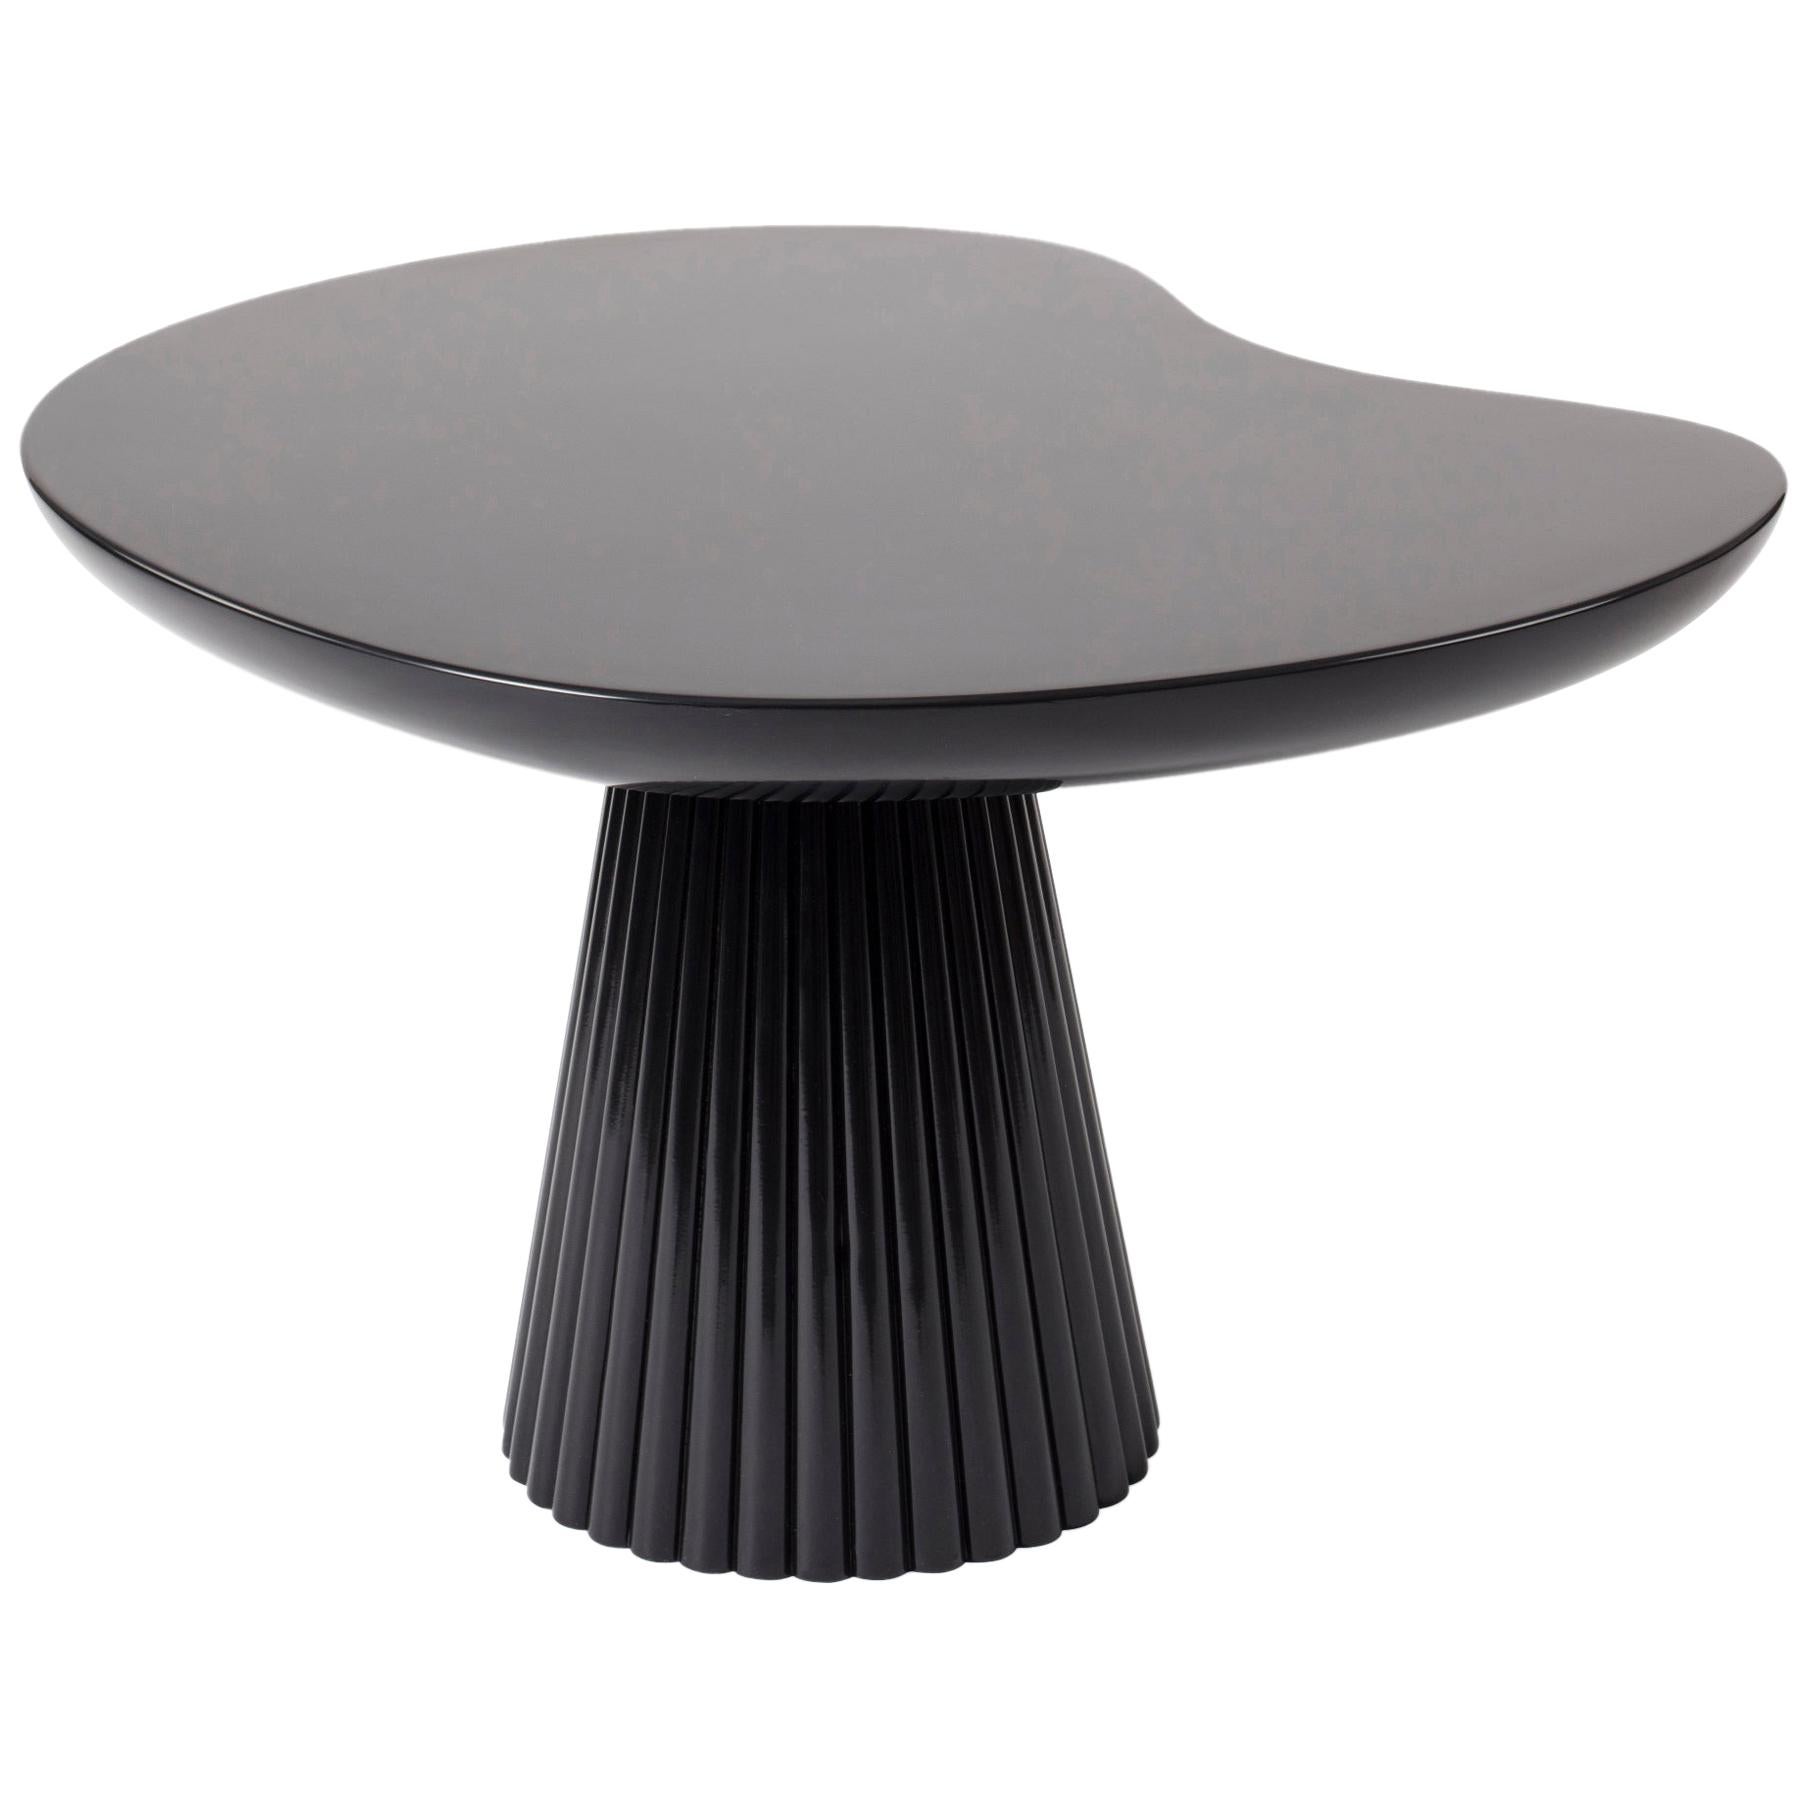 Modern Homage to Miro Table by Thomas Dariel For Sale